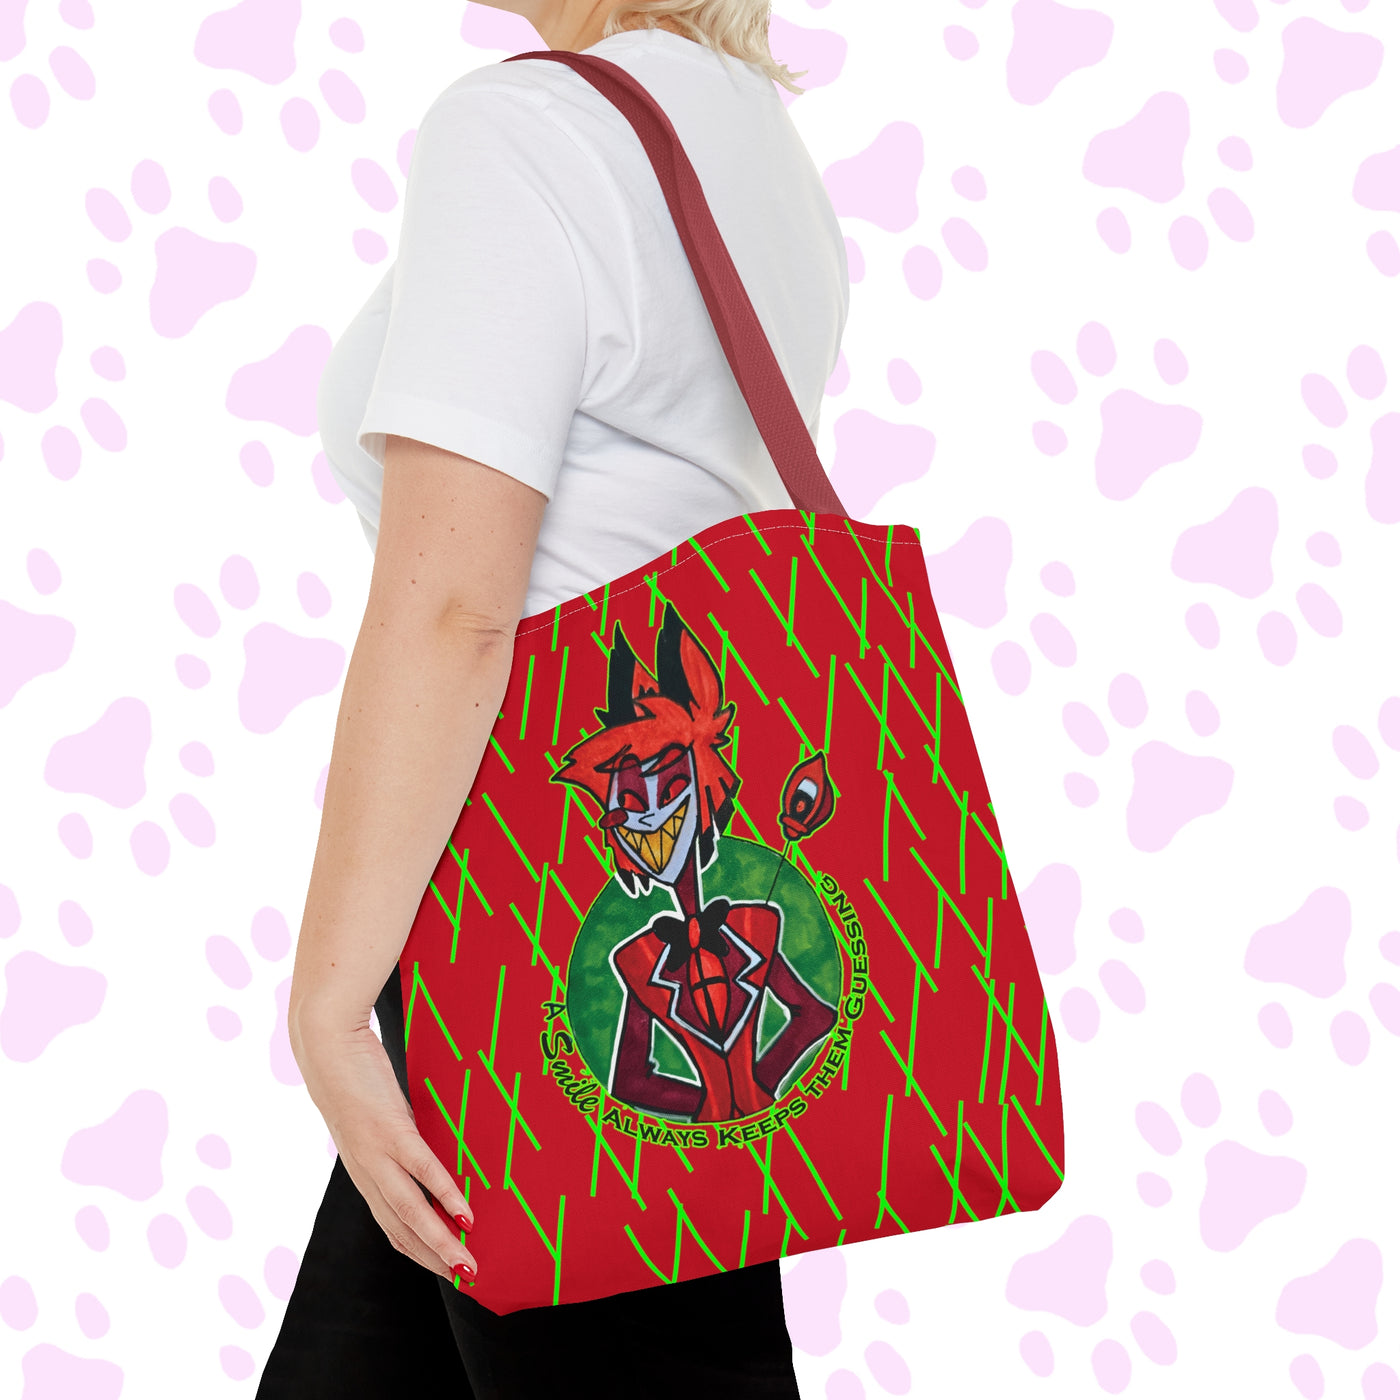 Allistor - A Smile Always Keeps them Guessing Tote Bag (AOP) - Stitches